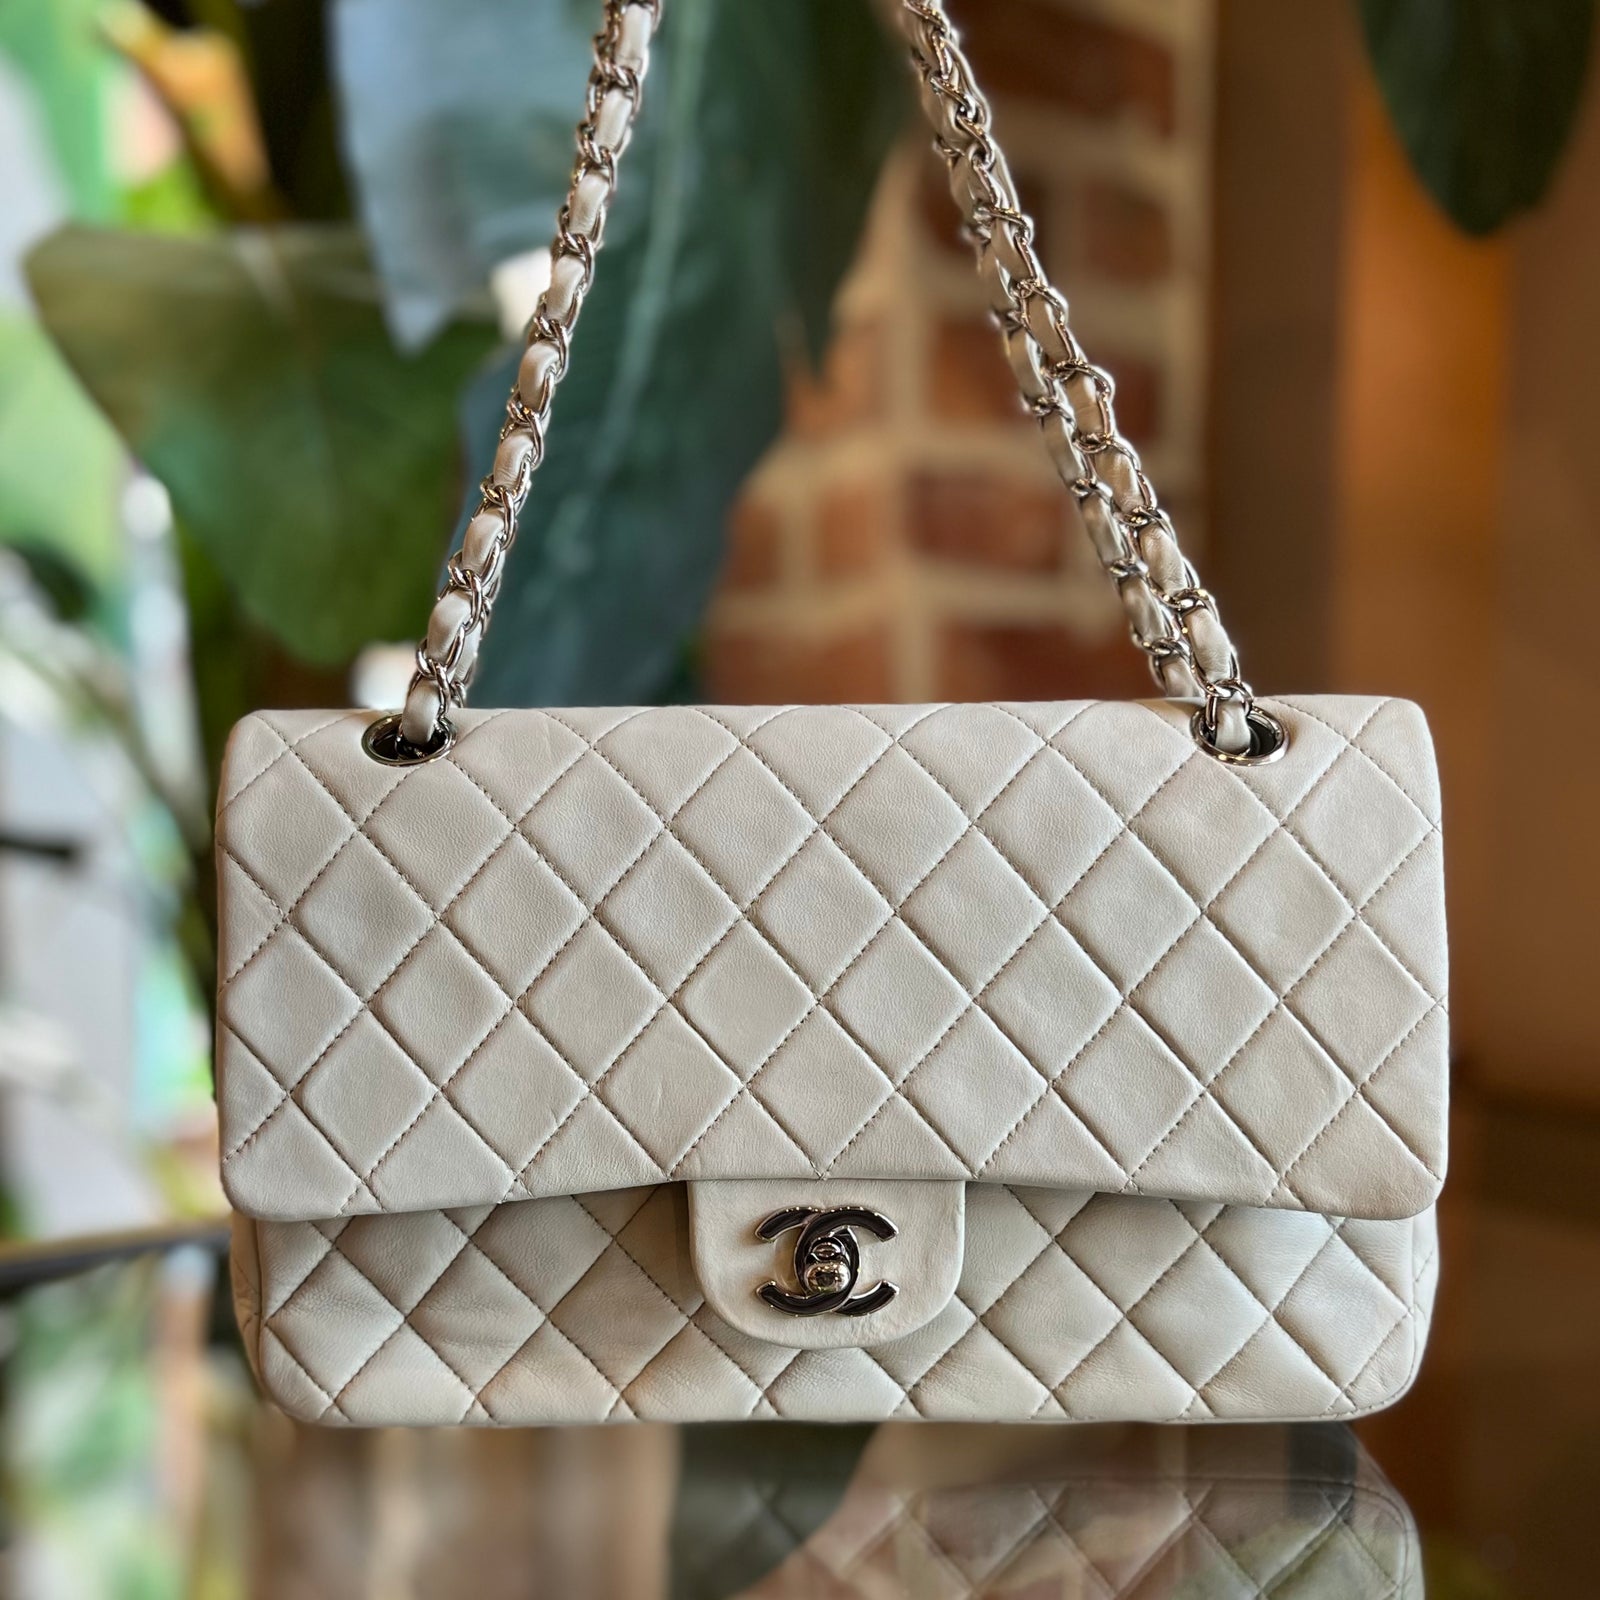 Chanel Classic Quilted Caviar Double Flap Jumbo Bag in Light Grey